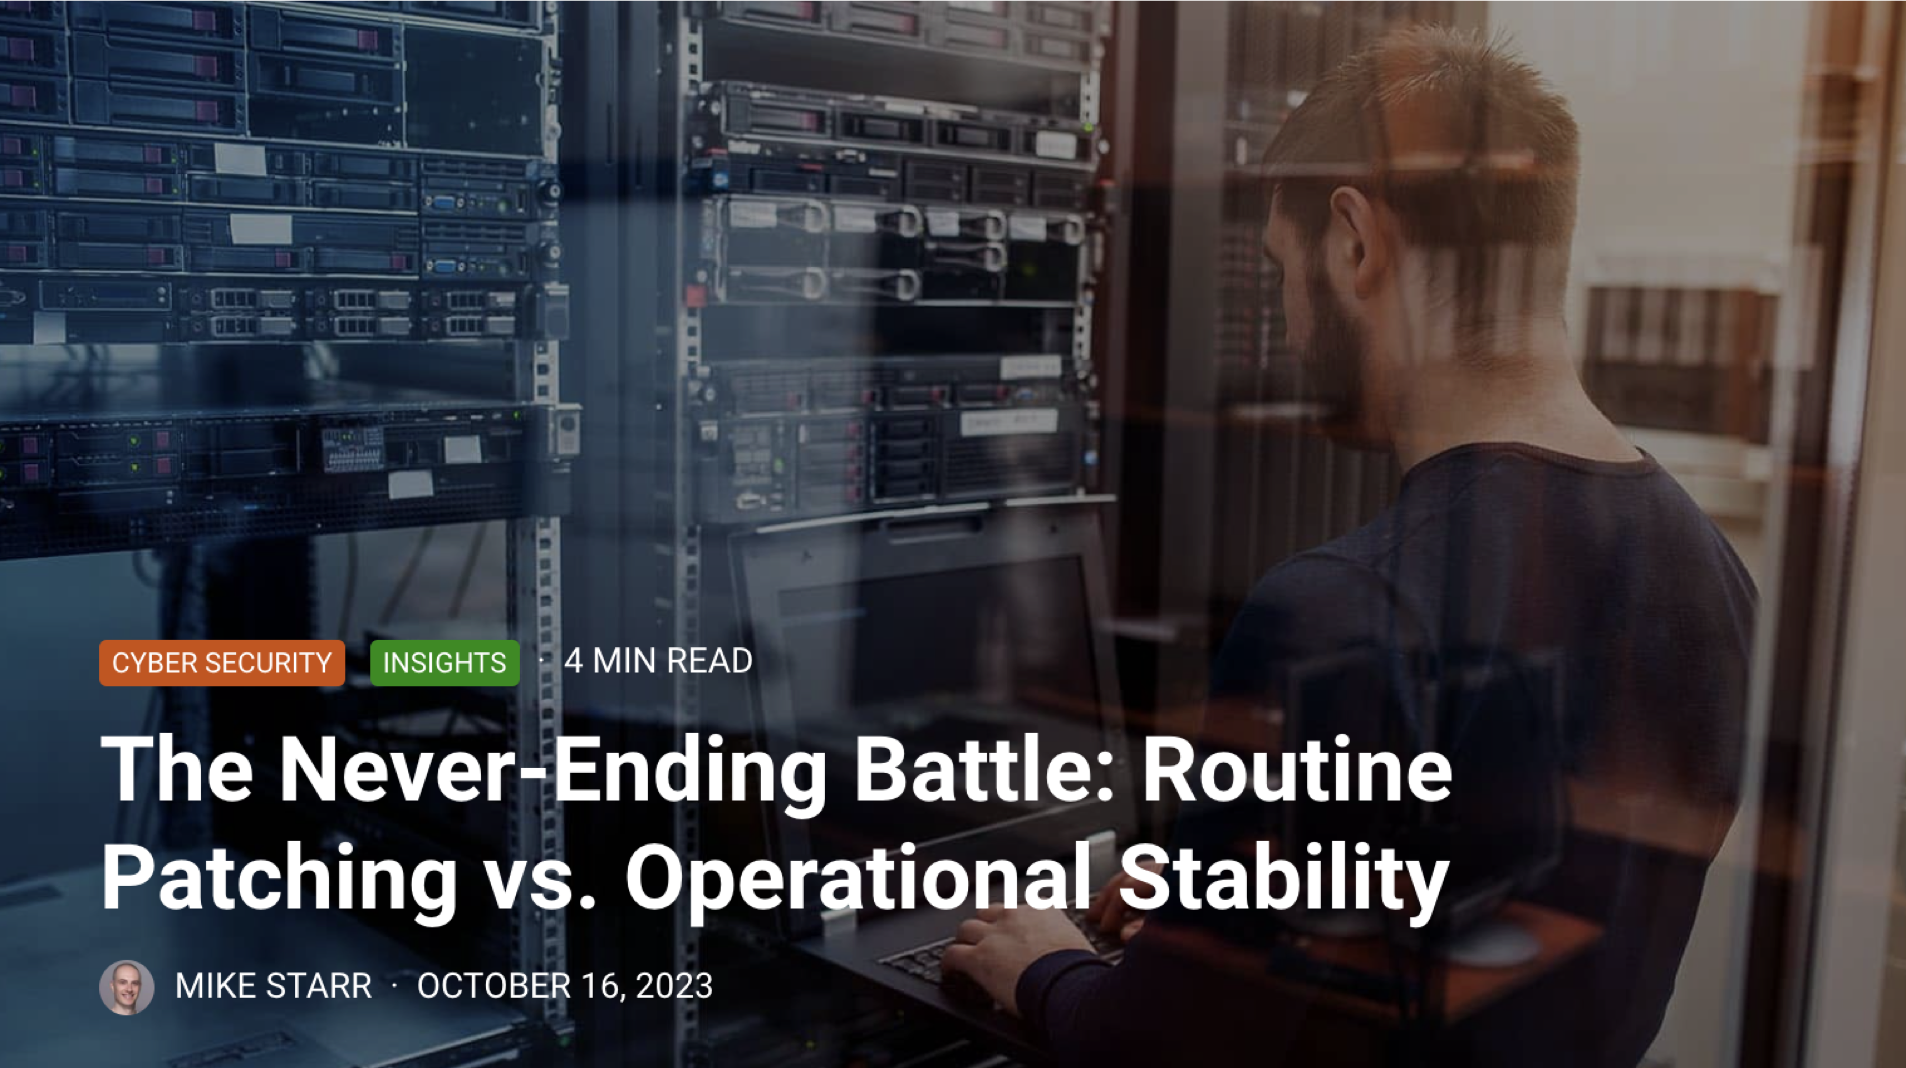 Operational risk is the primary challenge to aggressively mitigating cyber risk.